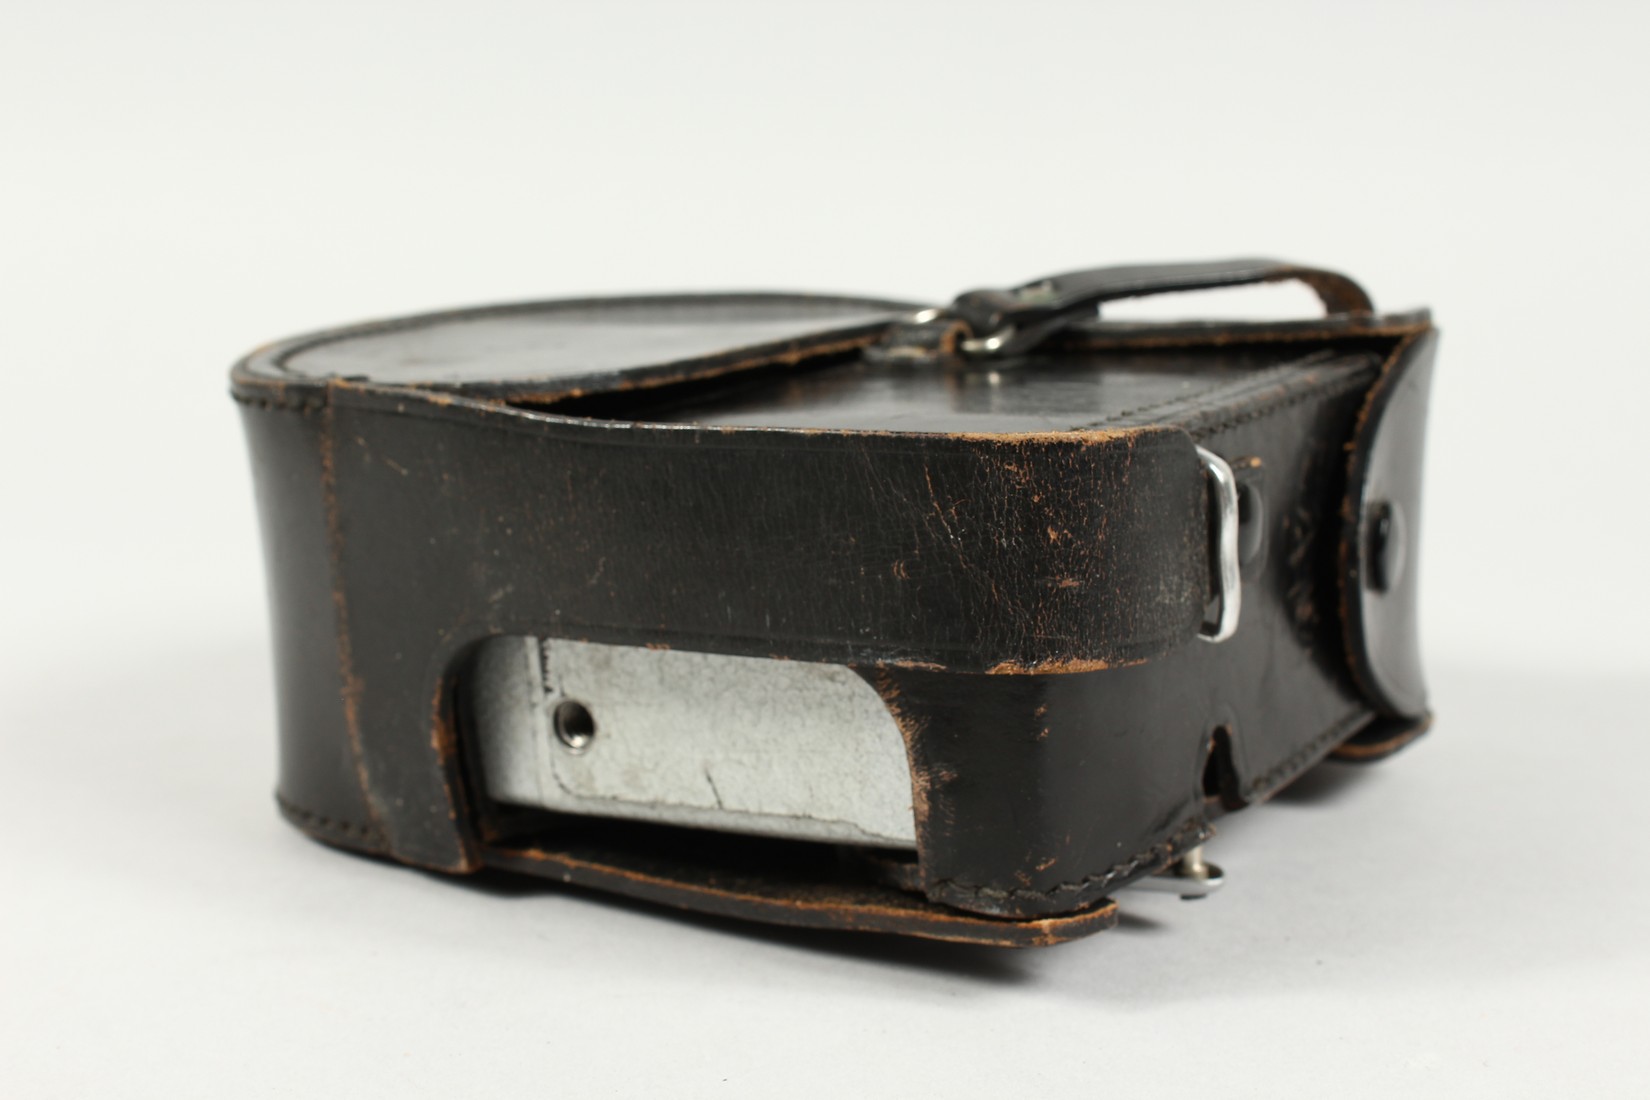 A BELL AND HOWELL LEATHER CASED MOVIE CAMERA - Image 14 of 14